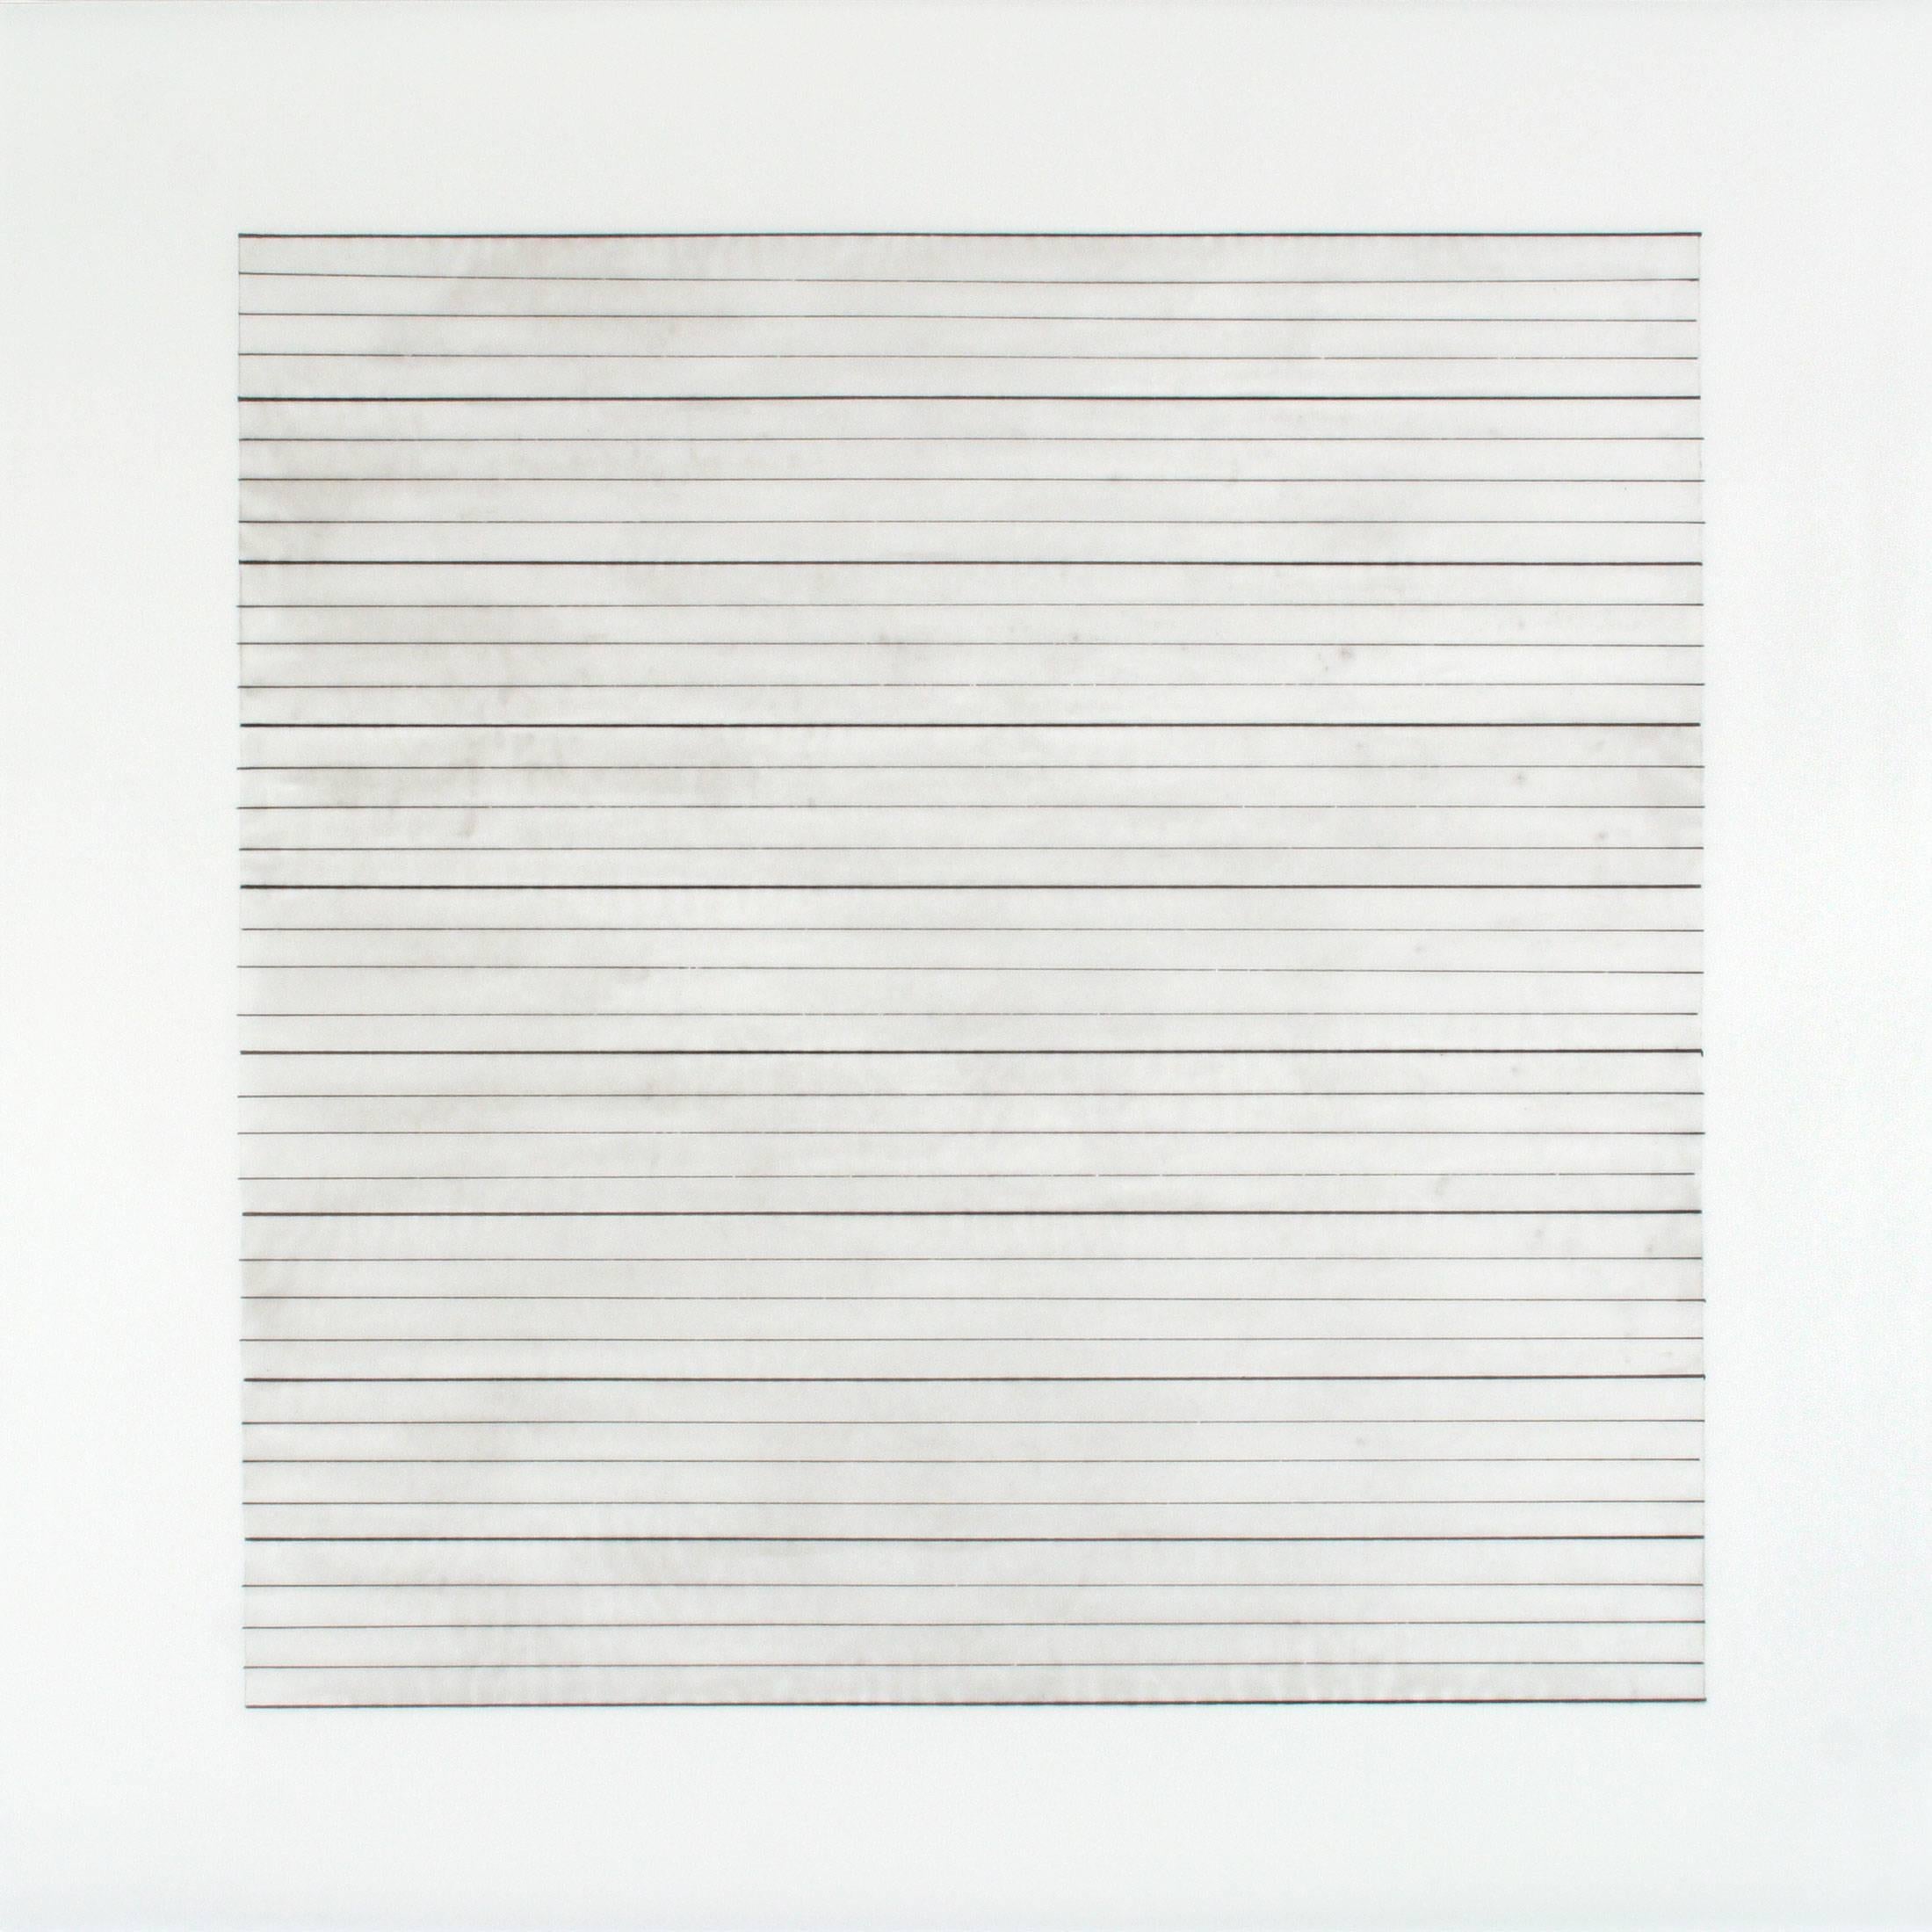 AGNES MARTIN. Paintings and Drawings 1974-1990 - Minimalist Art by Agnes Martin